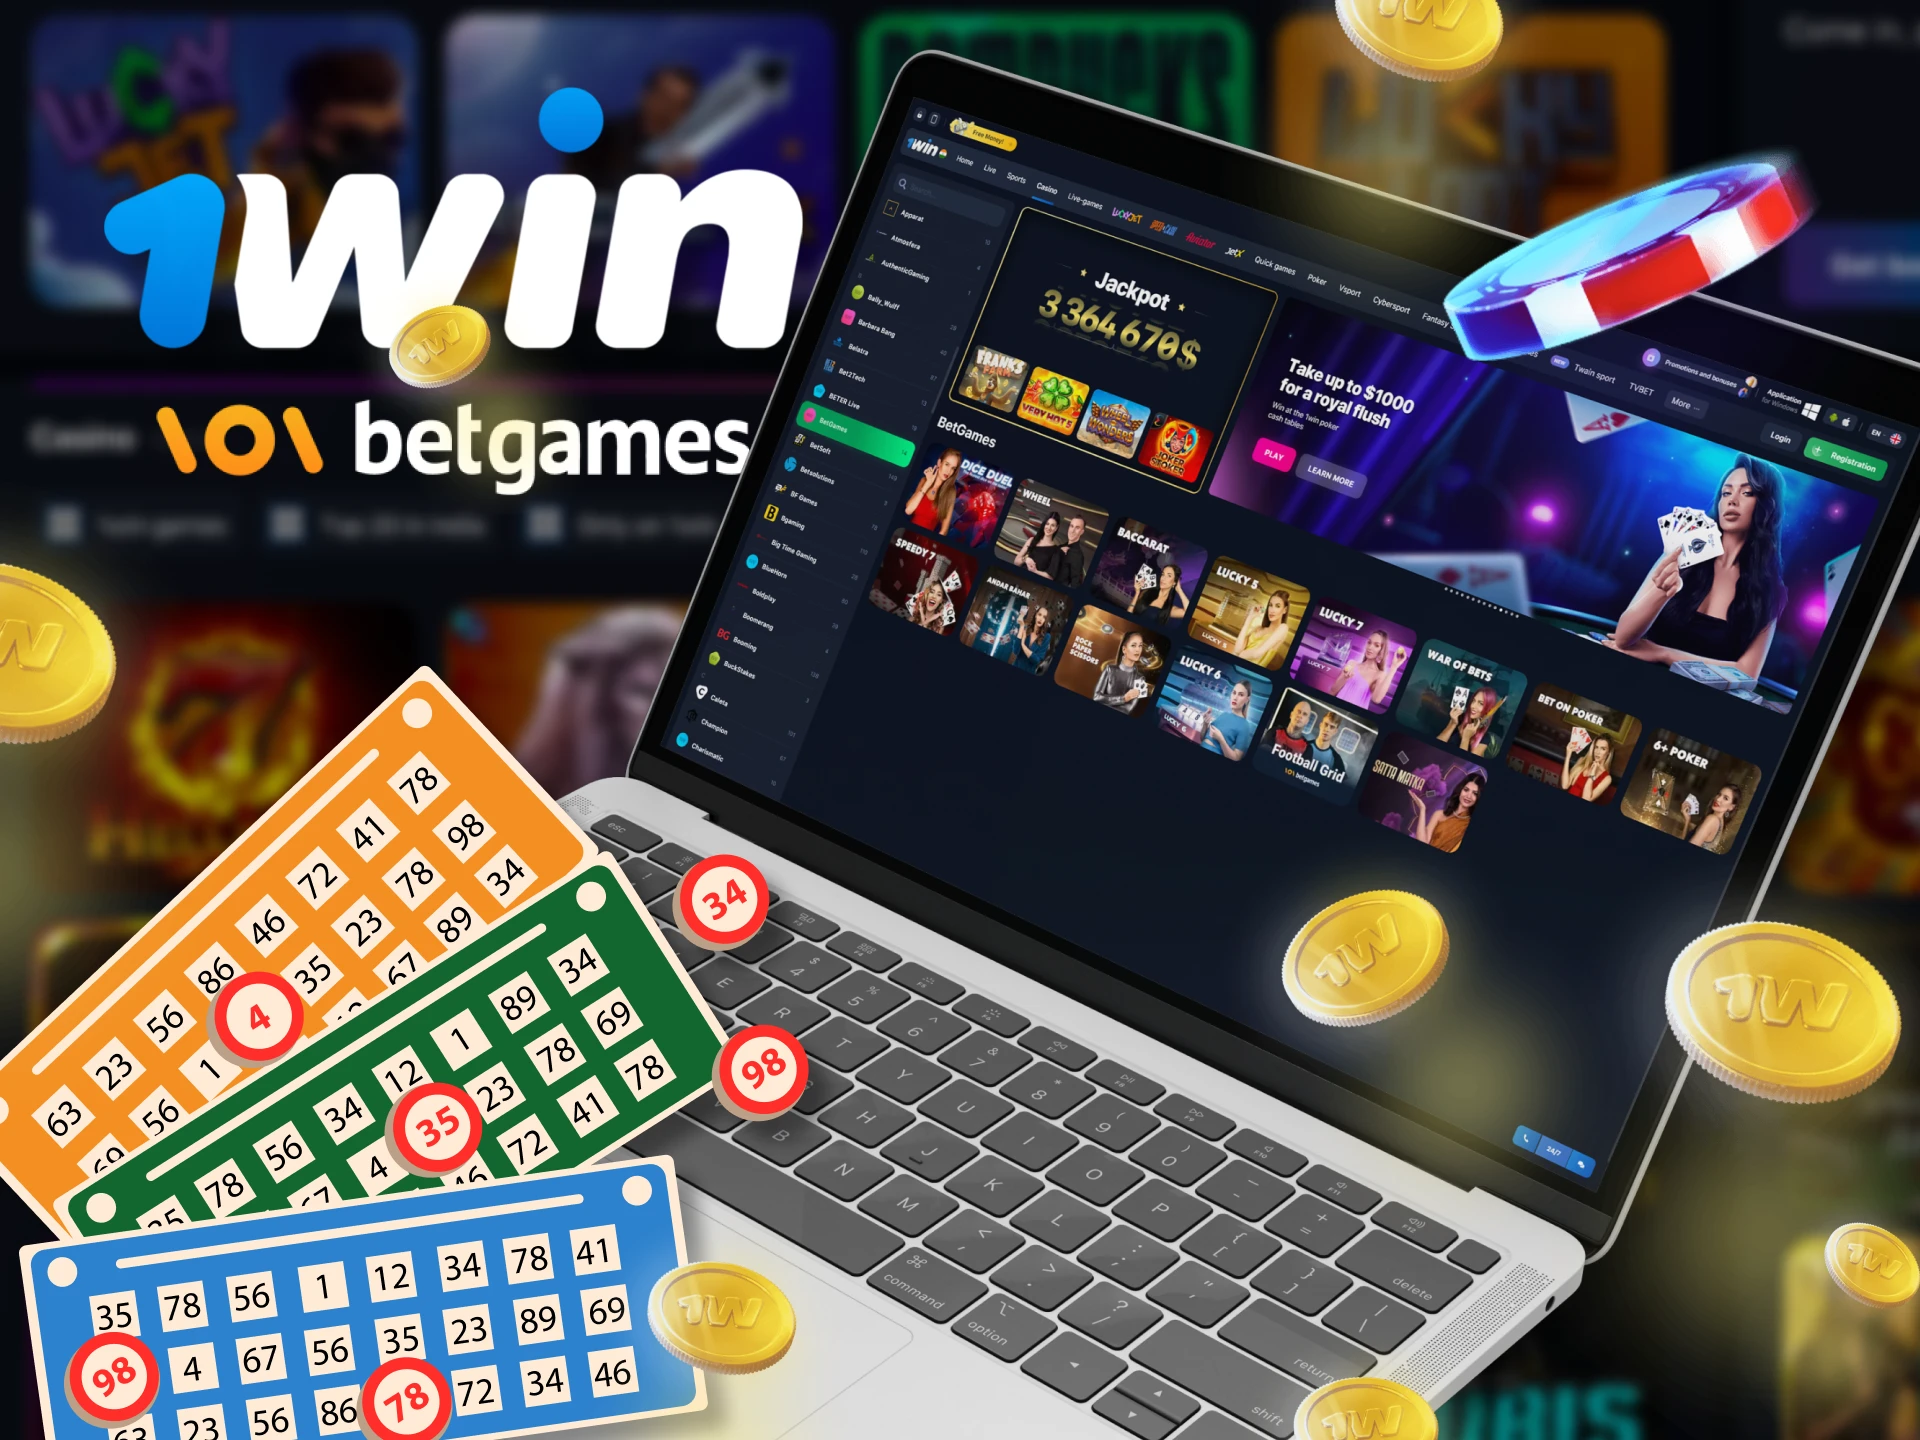 At 1Win you can play lottery games from BetGames.